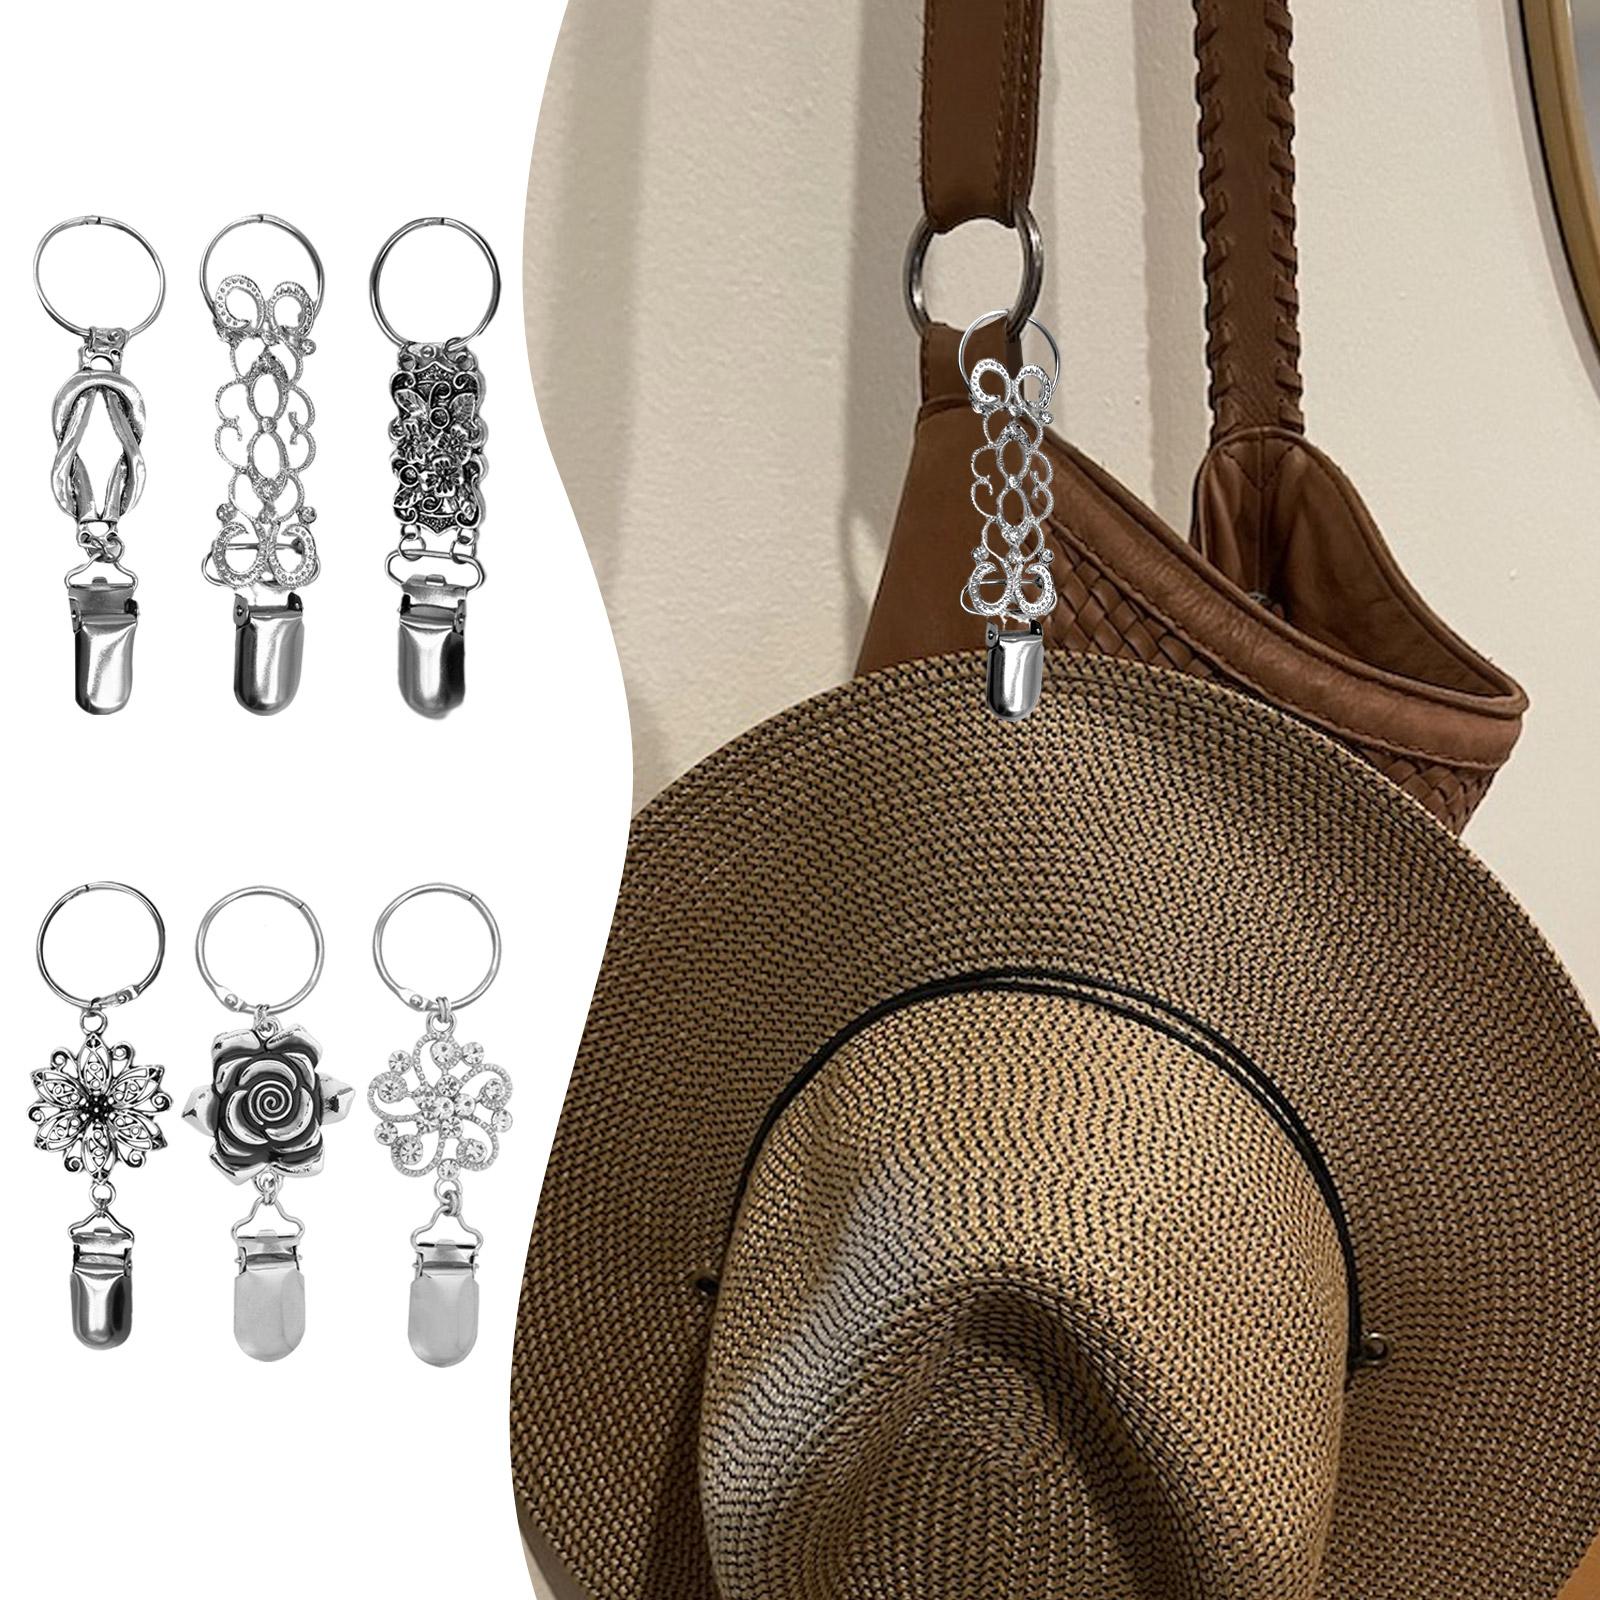 New Hat Clips For Bag Hat Holder For Travel Alloy Accessory Clip Outdoor U7U8 - image 2 of 9